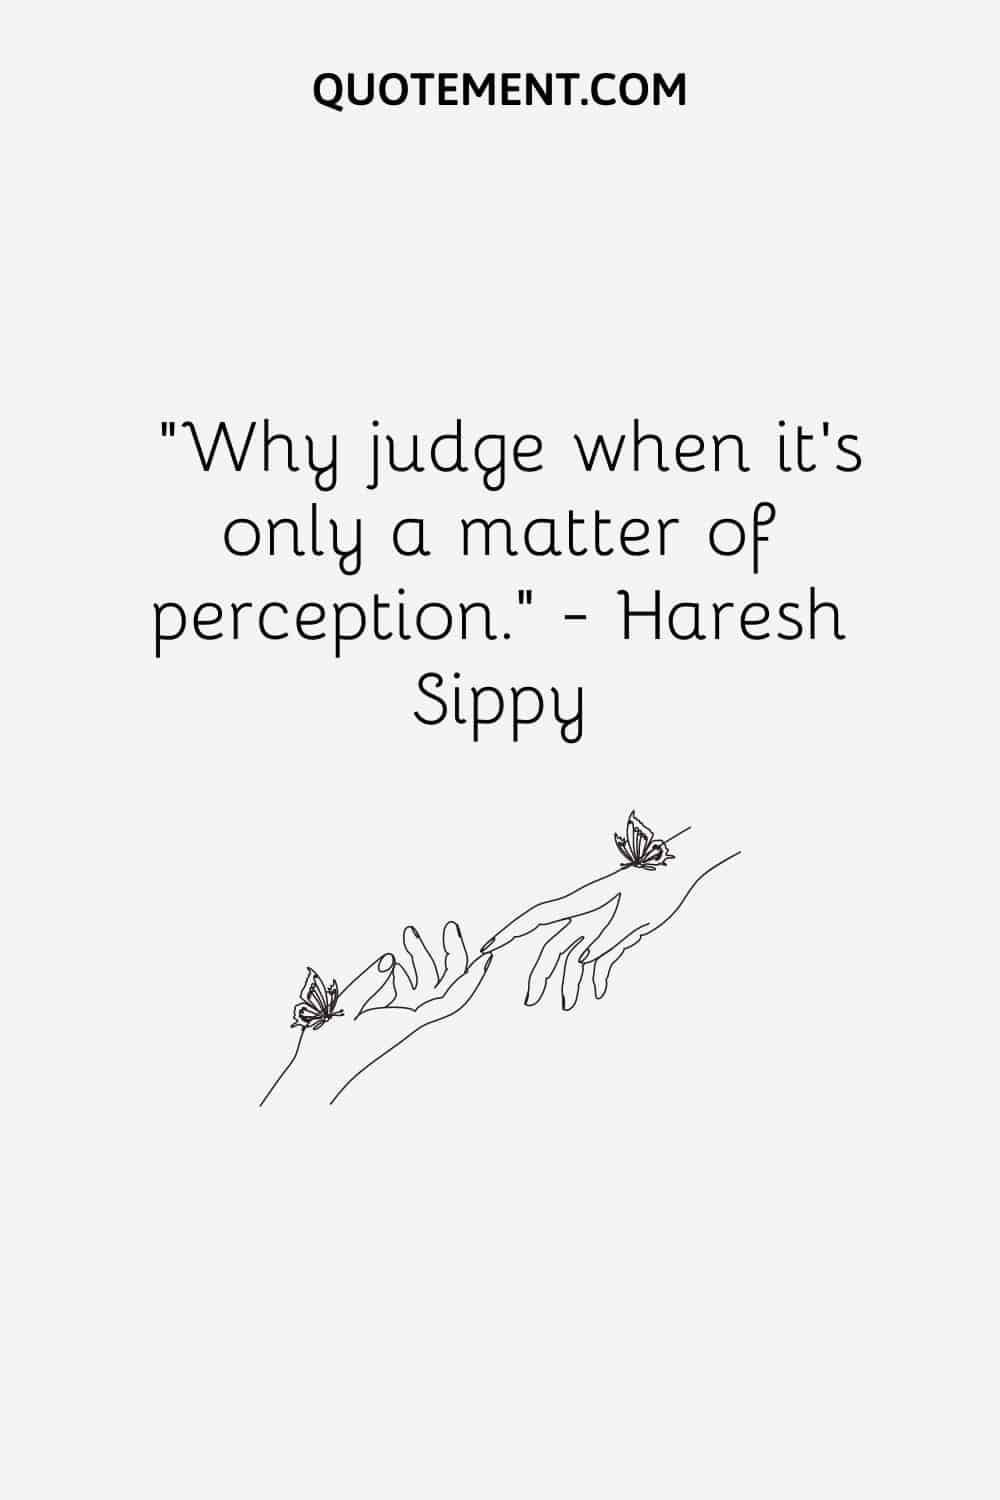 “Why judge when it’s only a matter of perception.” — Haresh Sippy